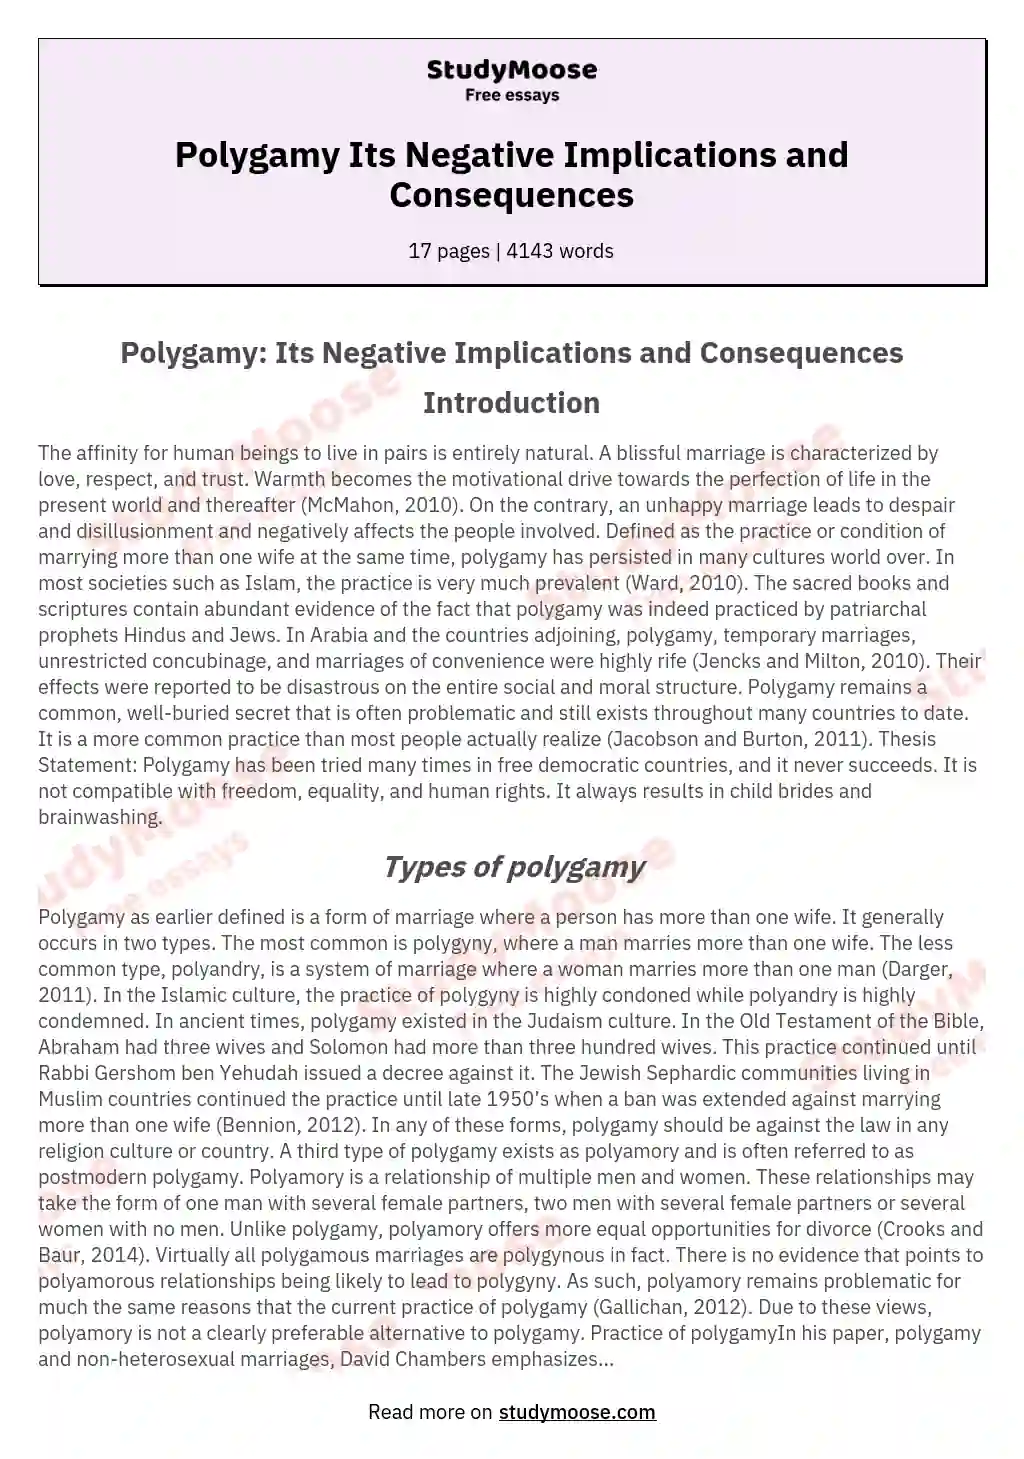 Polygamy Its Negative Implications and Consequences essay